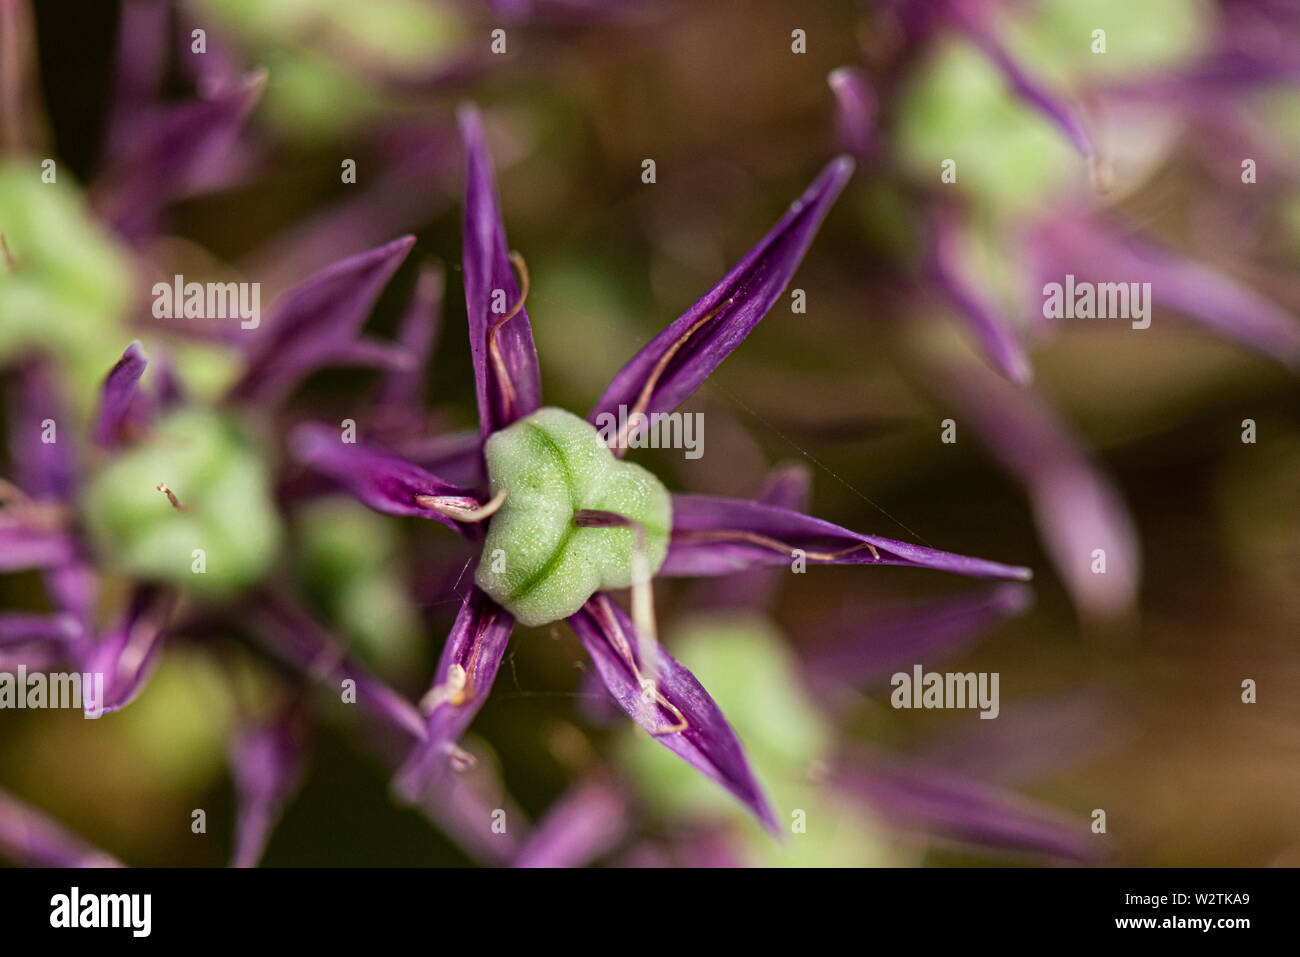 A close up of a flower on the flower head of an Allium 'Globemaster' Stock Photo